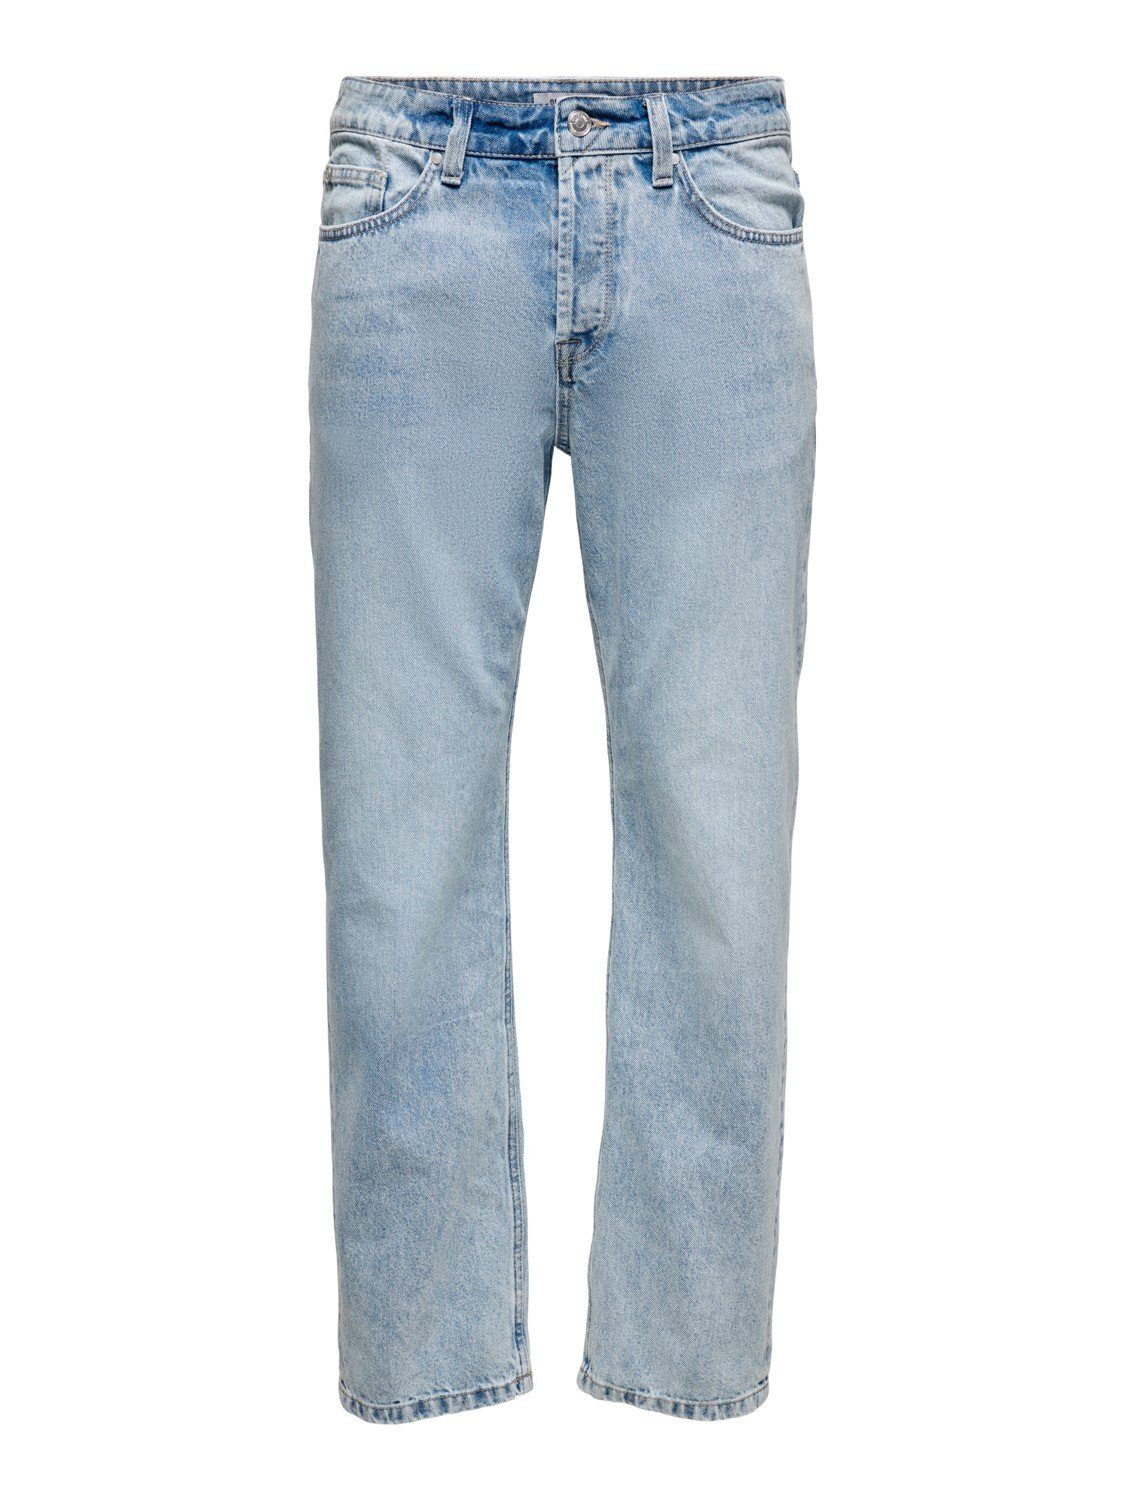 ONLY & SONS Relax-fit-Jeans ONSEDGE aus Baumwolle